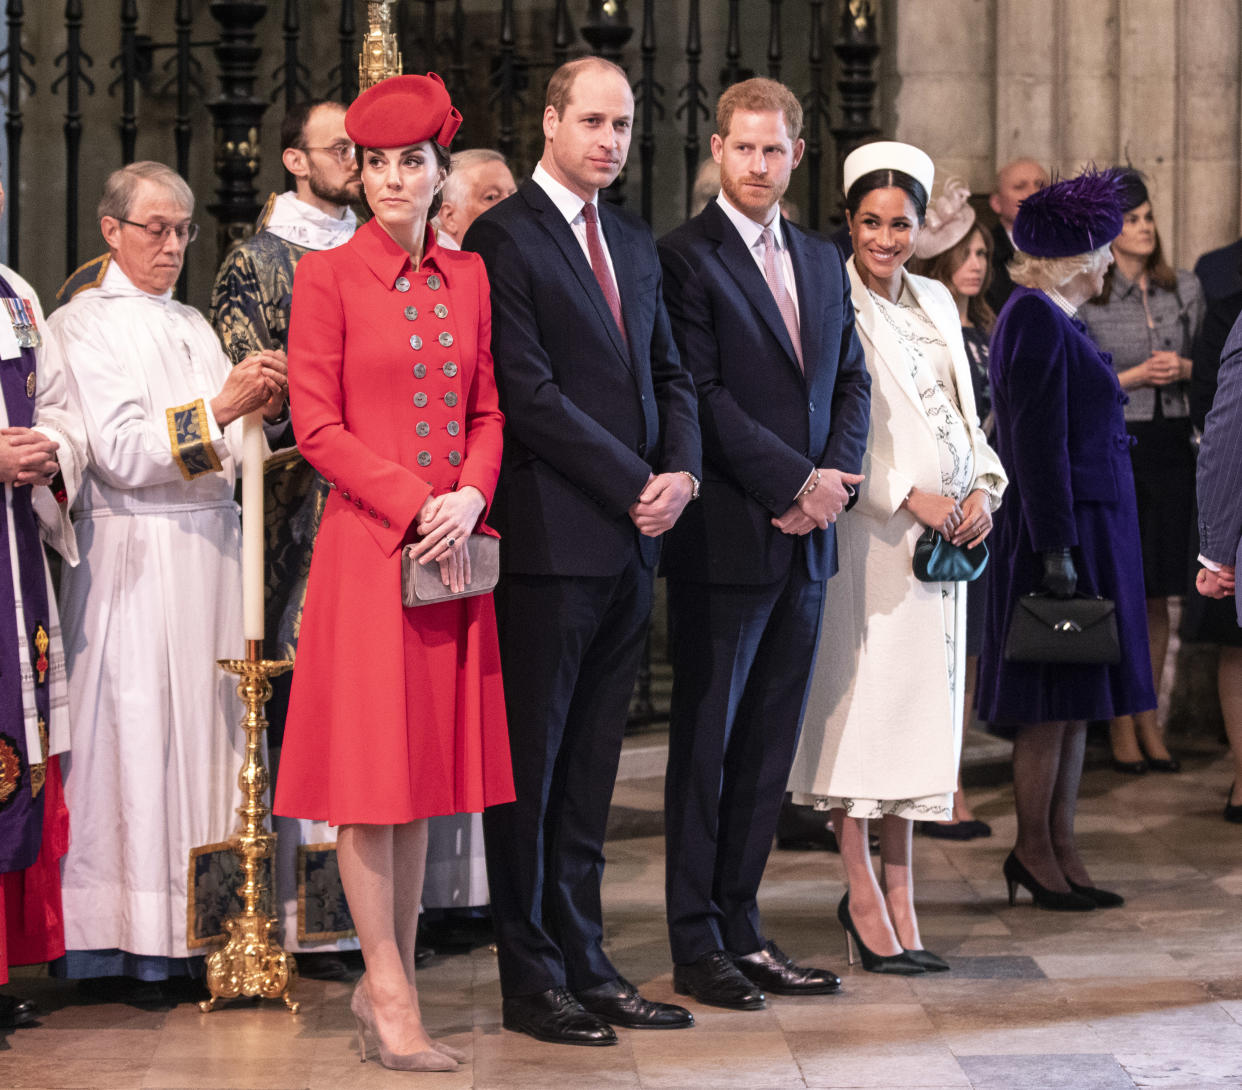 Kate, William, Harry and Meghan at the Commonwealth Day service at Westminster Abbey on Monday [Photo: Getty]